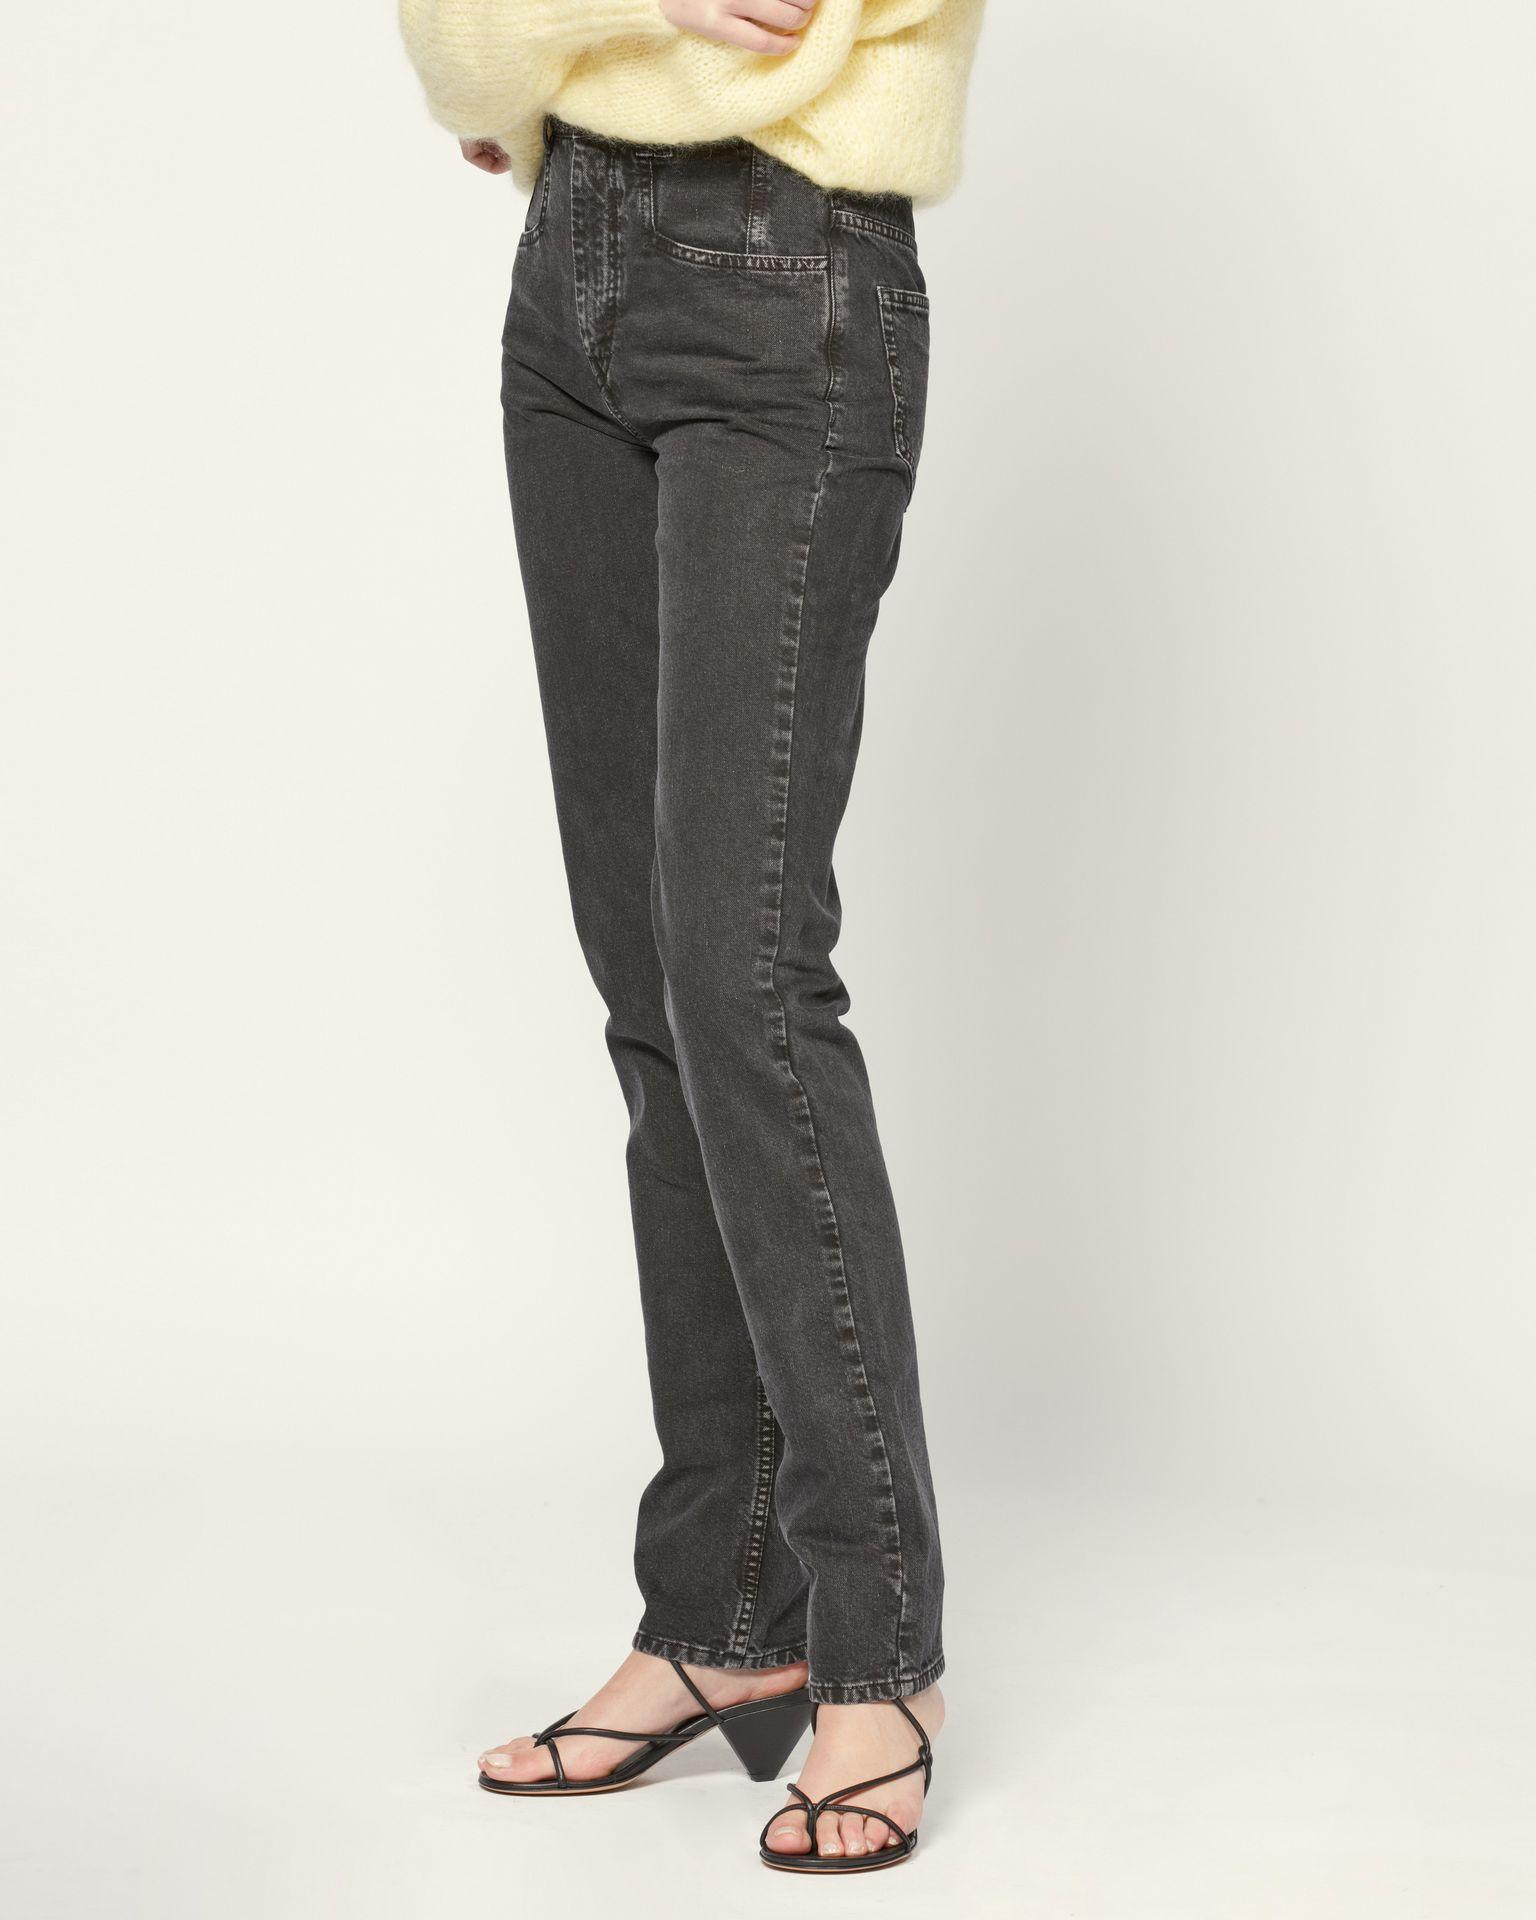 Isabel Marant Nominic Jeans in Black   Lyst